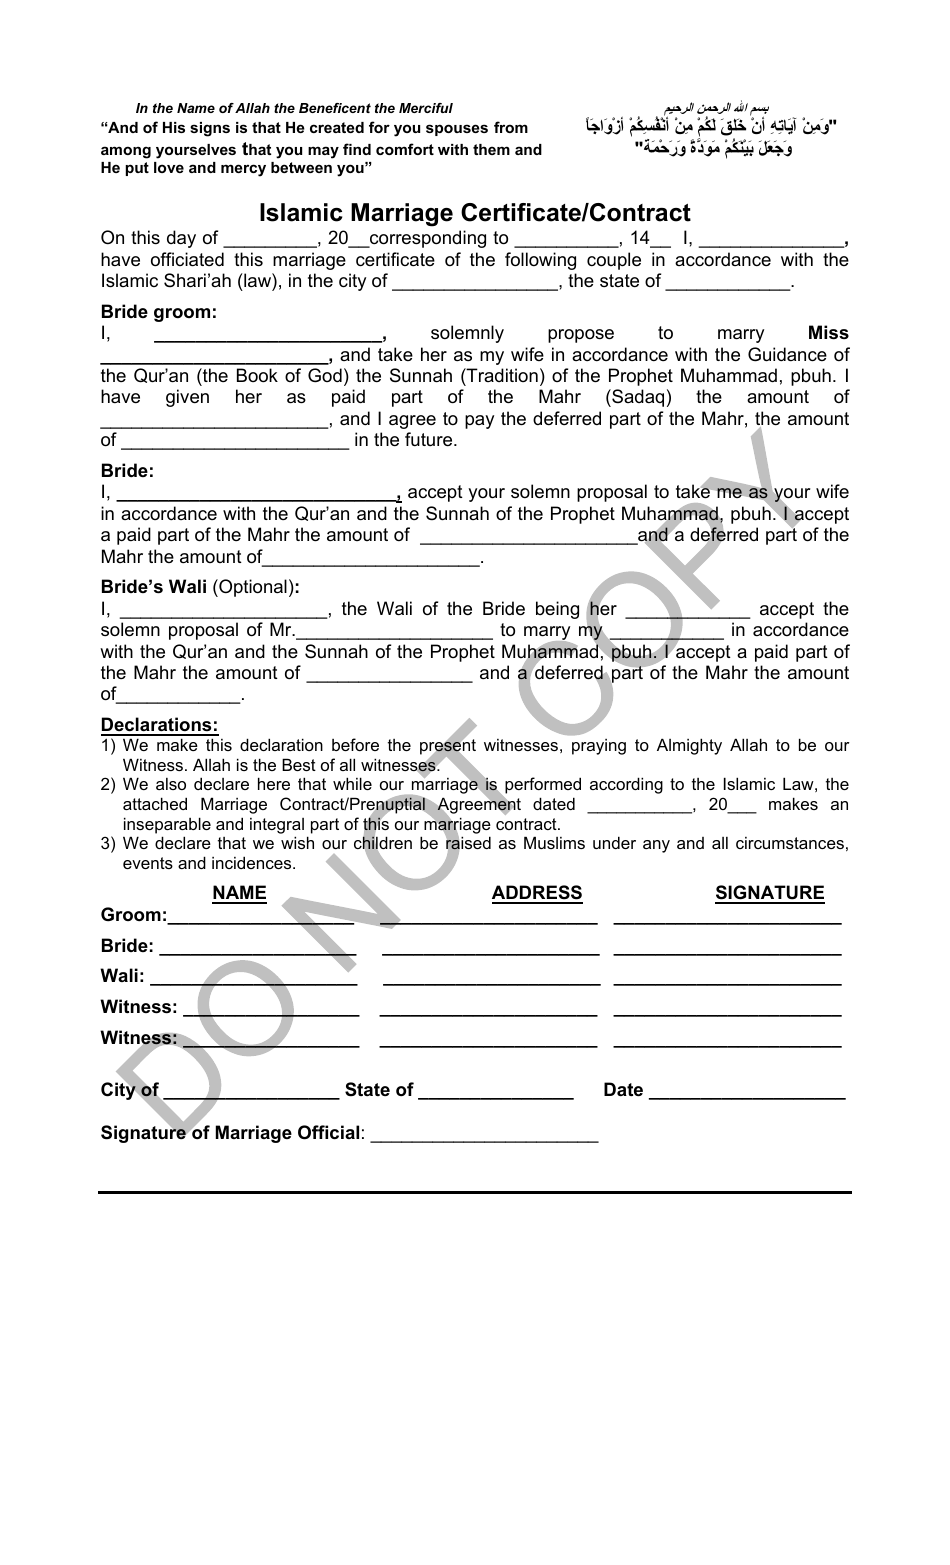 Islamic Marriage Certificate / Contract Template, Page 1